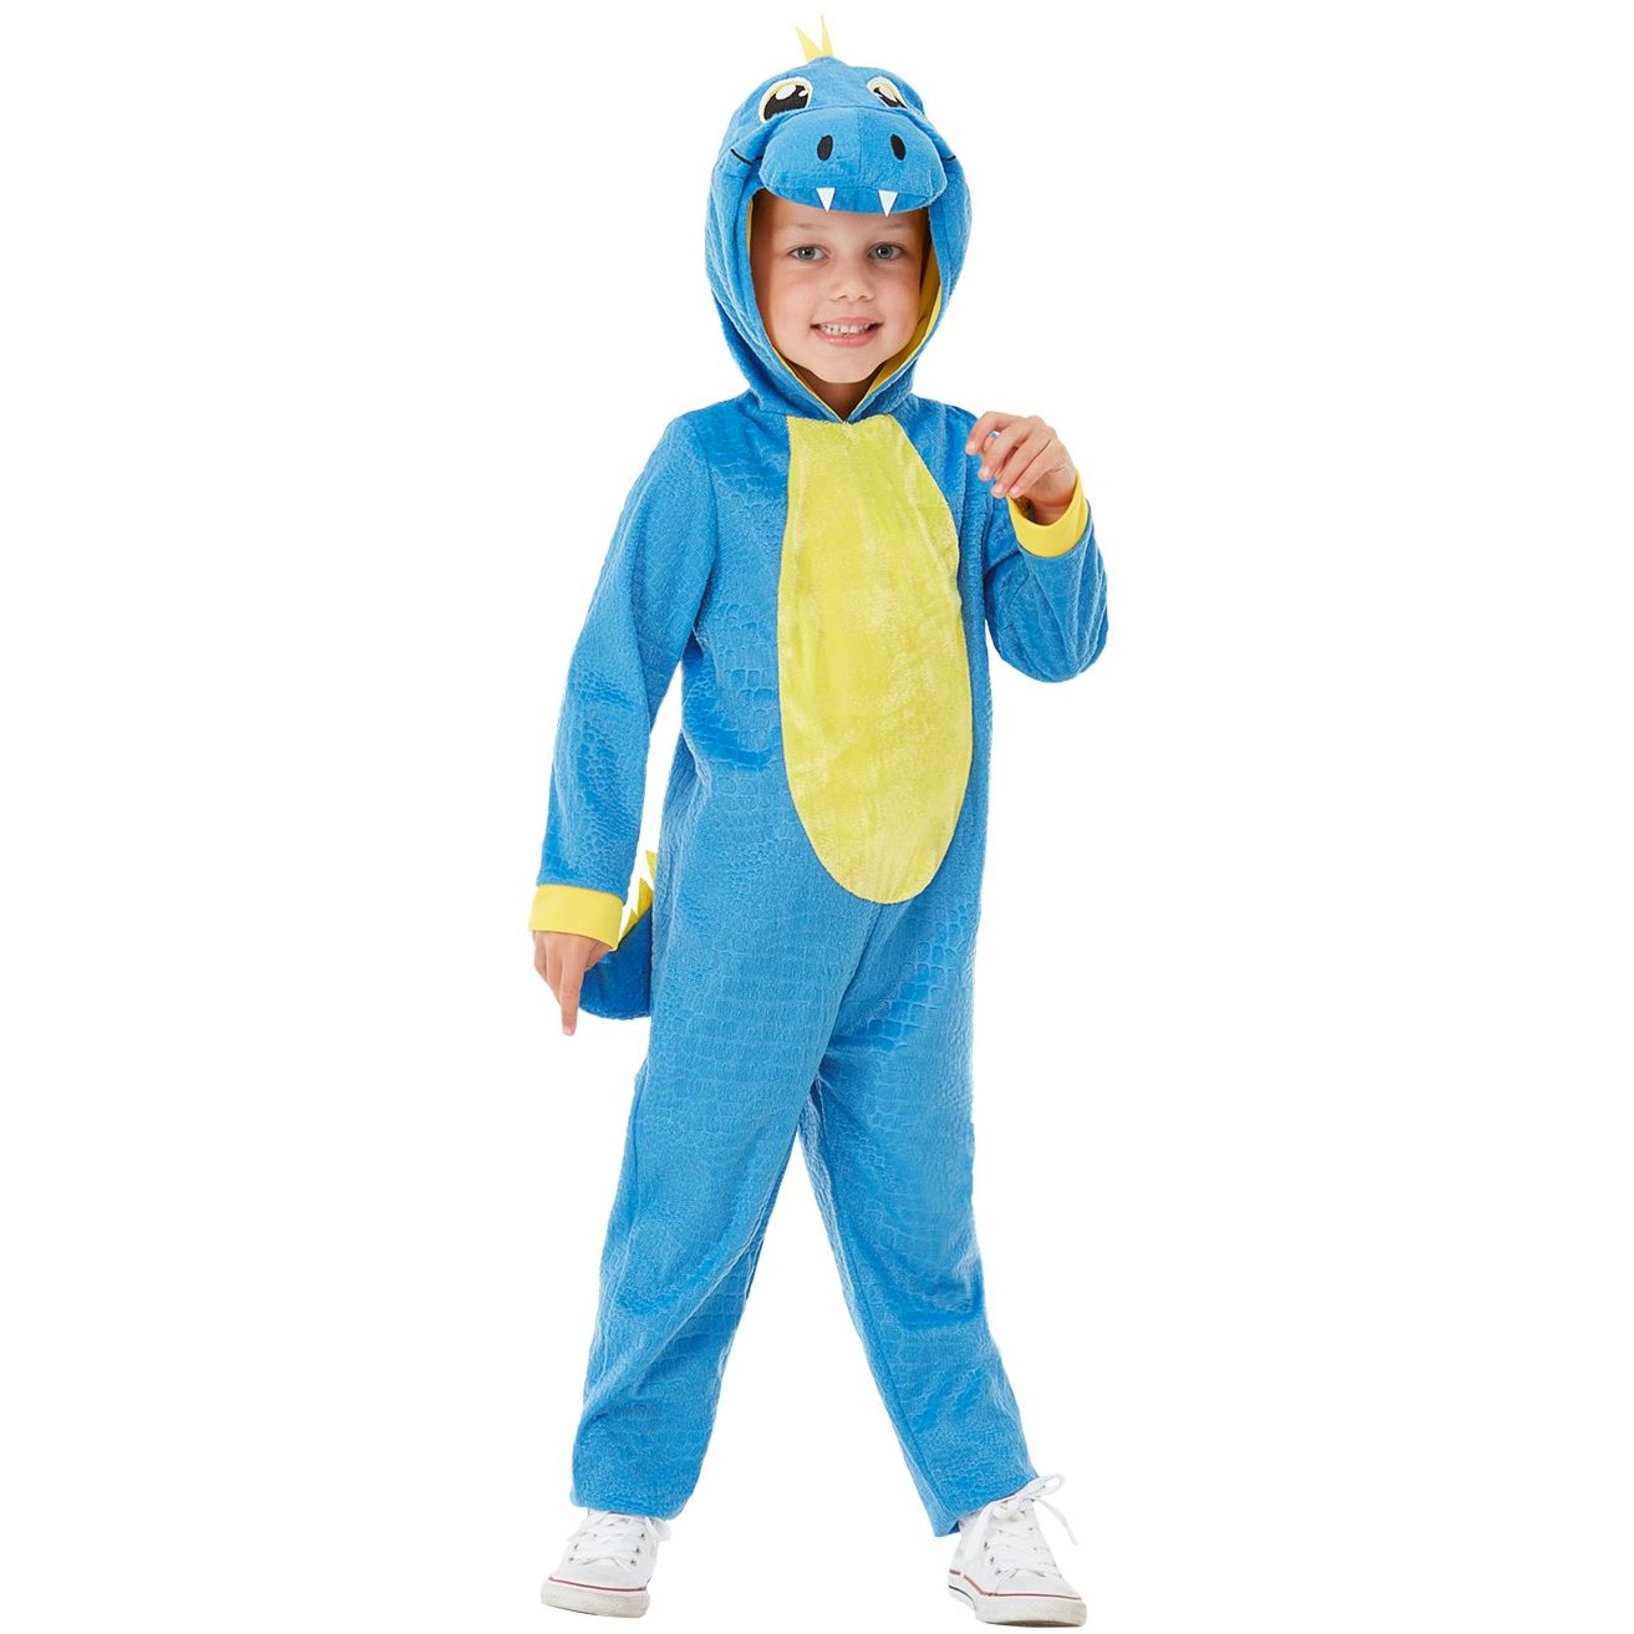 Toddlers Cute Dinosaur Fancy Dress Costume Age 1 - 2